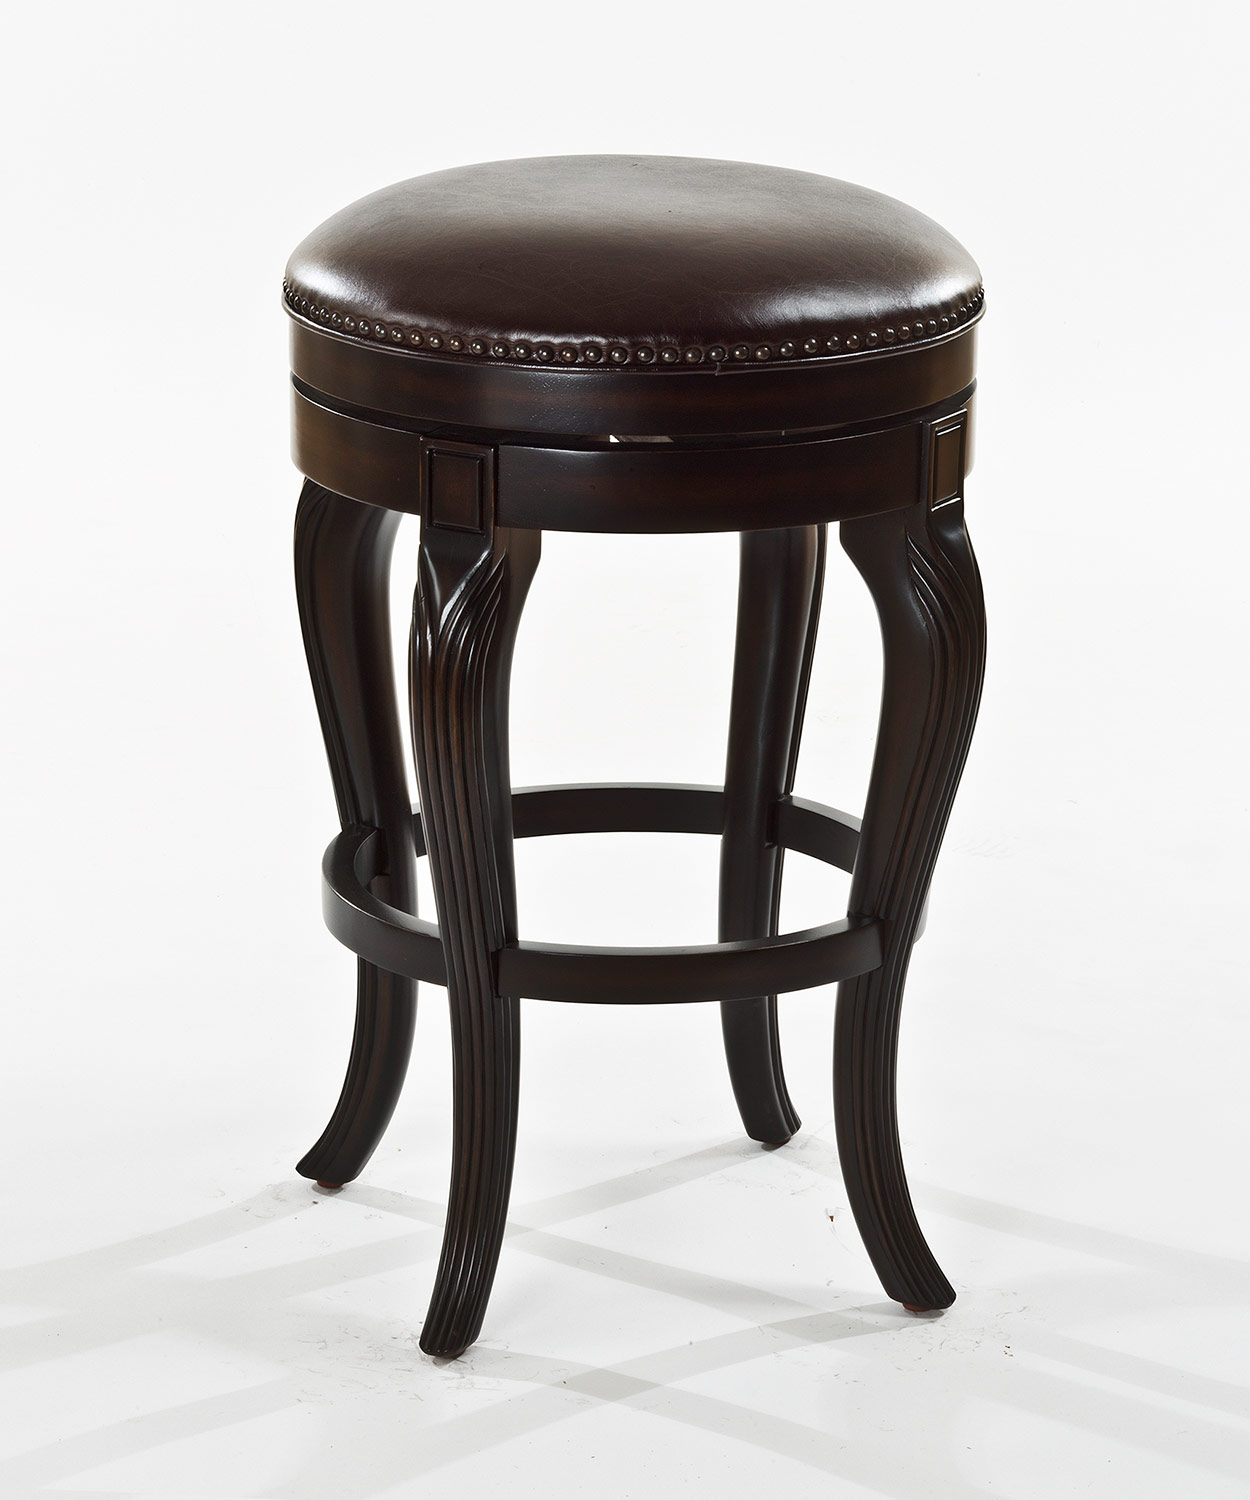 Hillsdale Cambridge Court Backless Counter Stool - Dark Cherry - Brown Leatherette